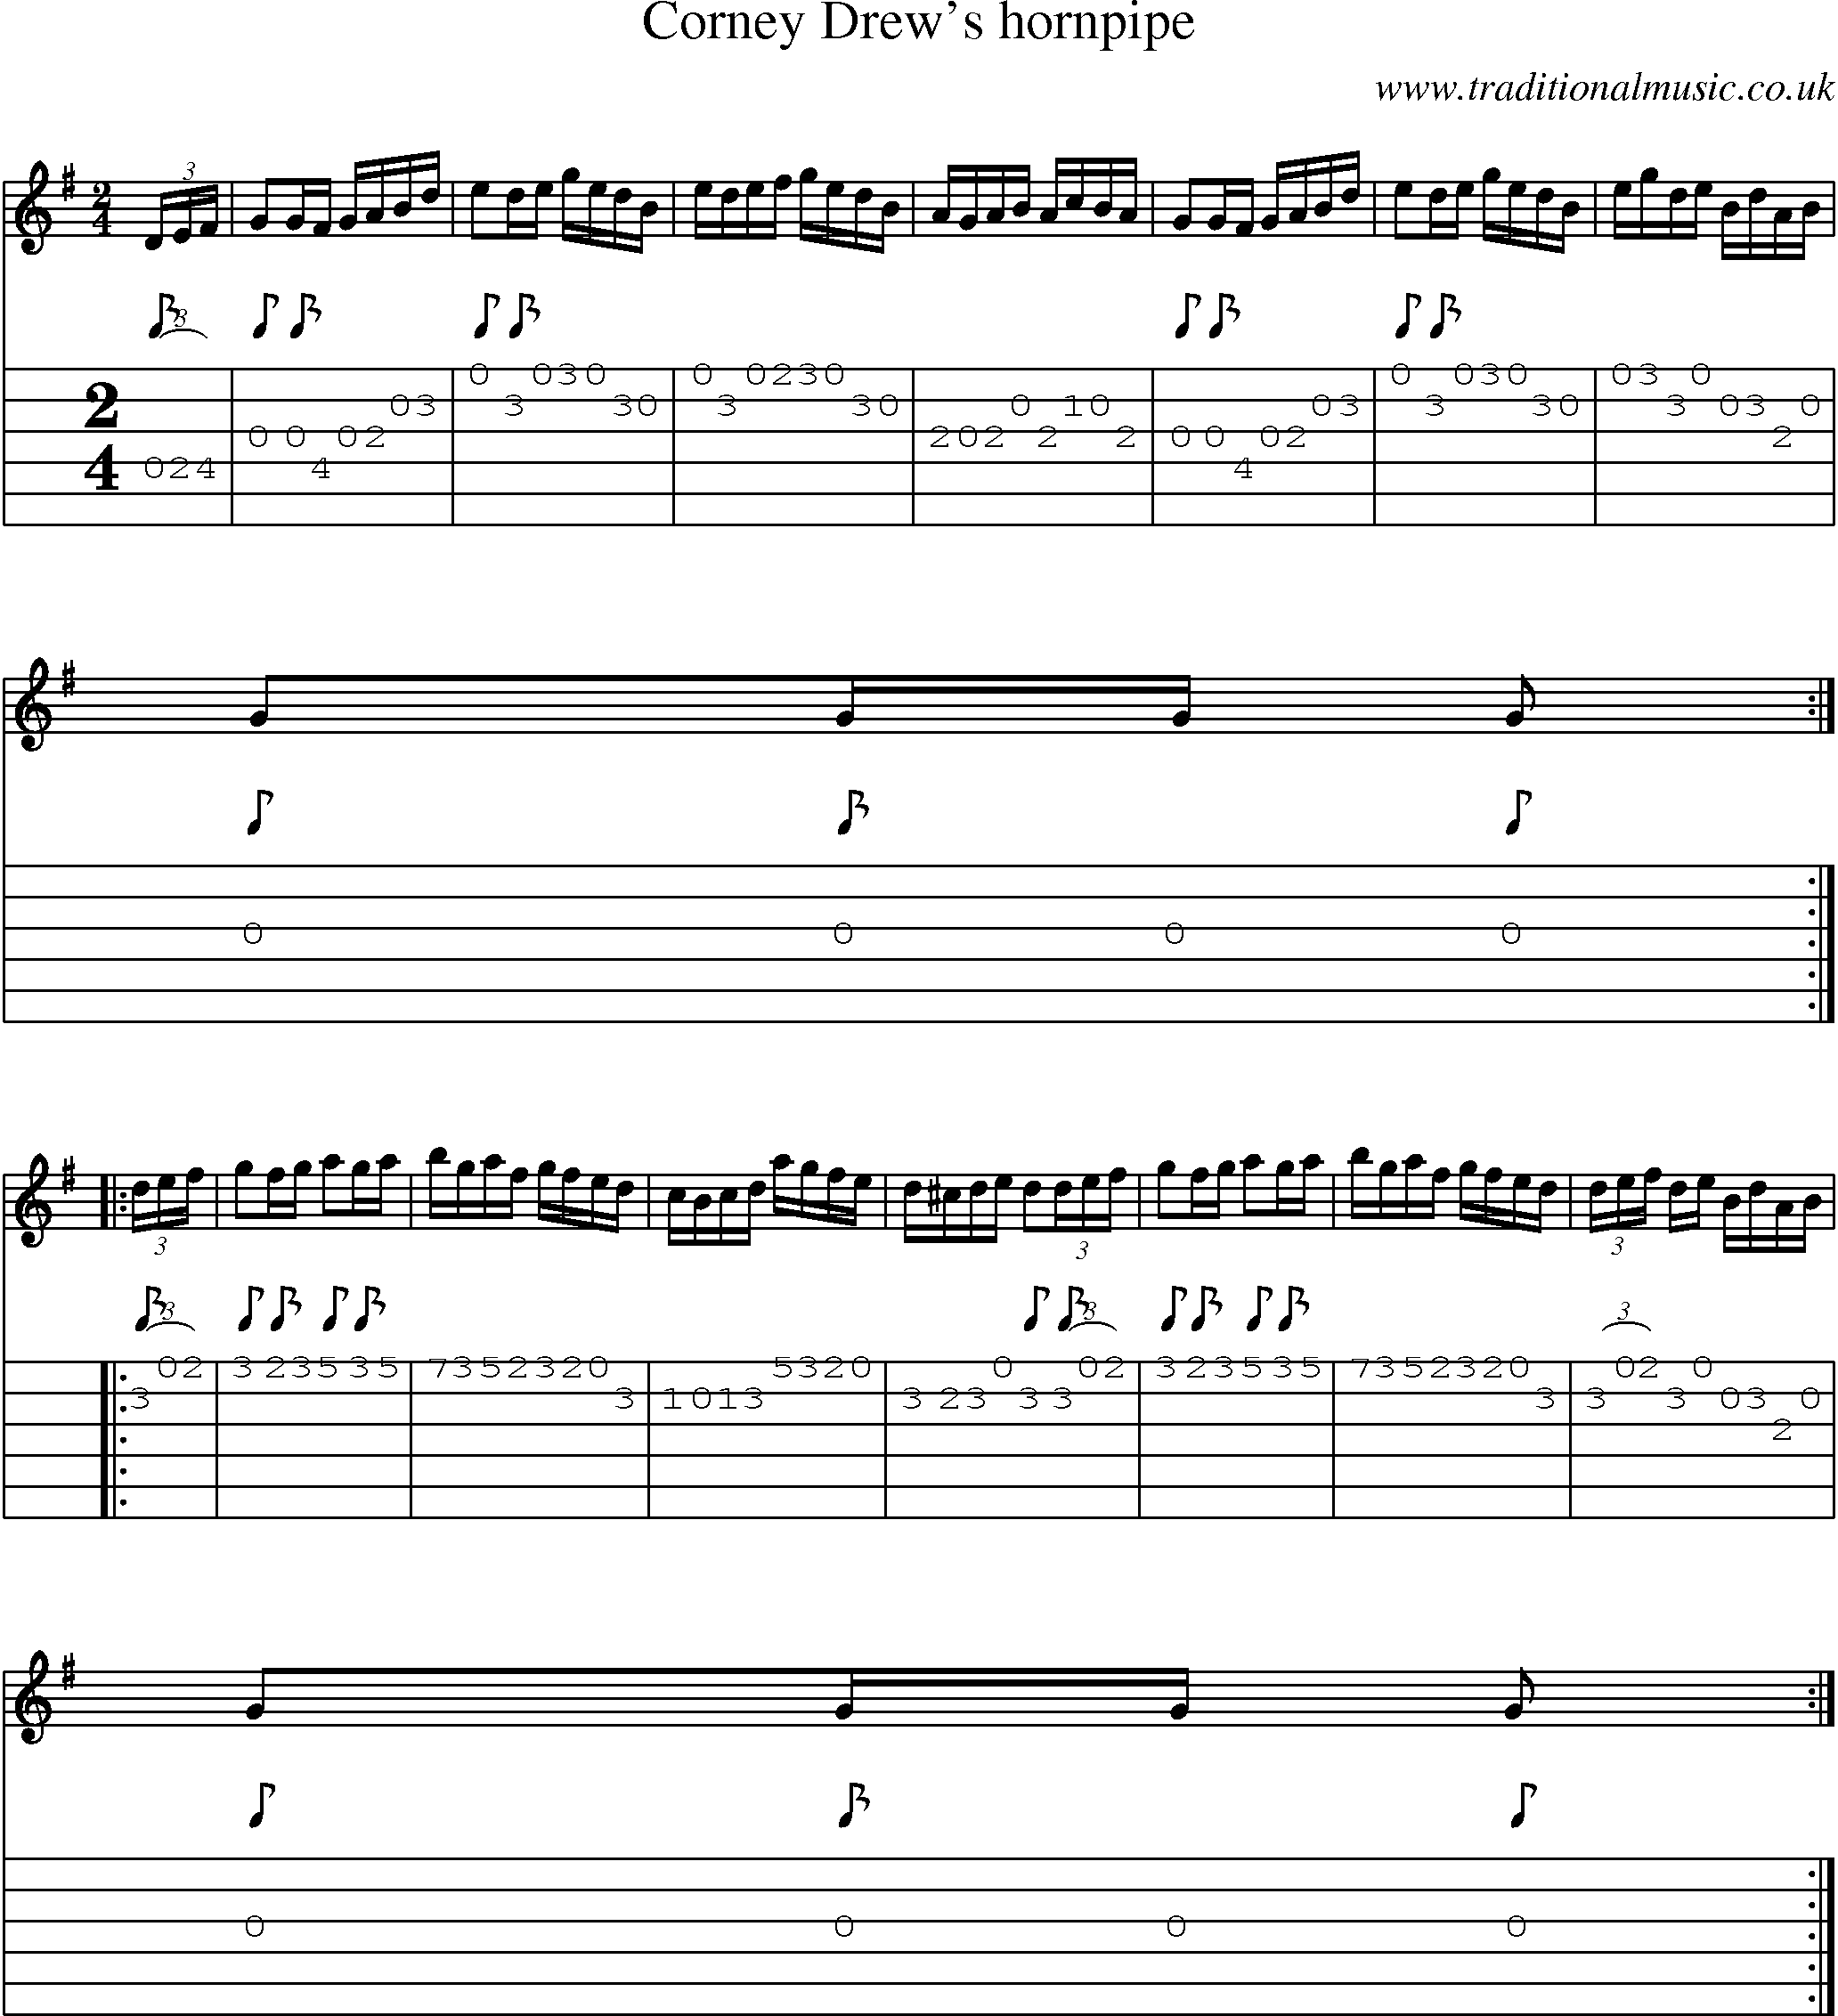 Music Score and Guitar Tabs for Corney Drews Hornpipe